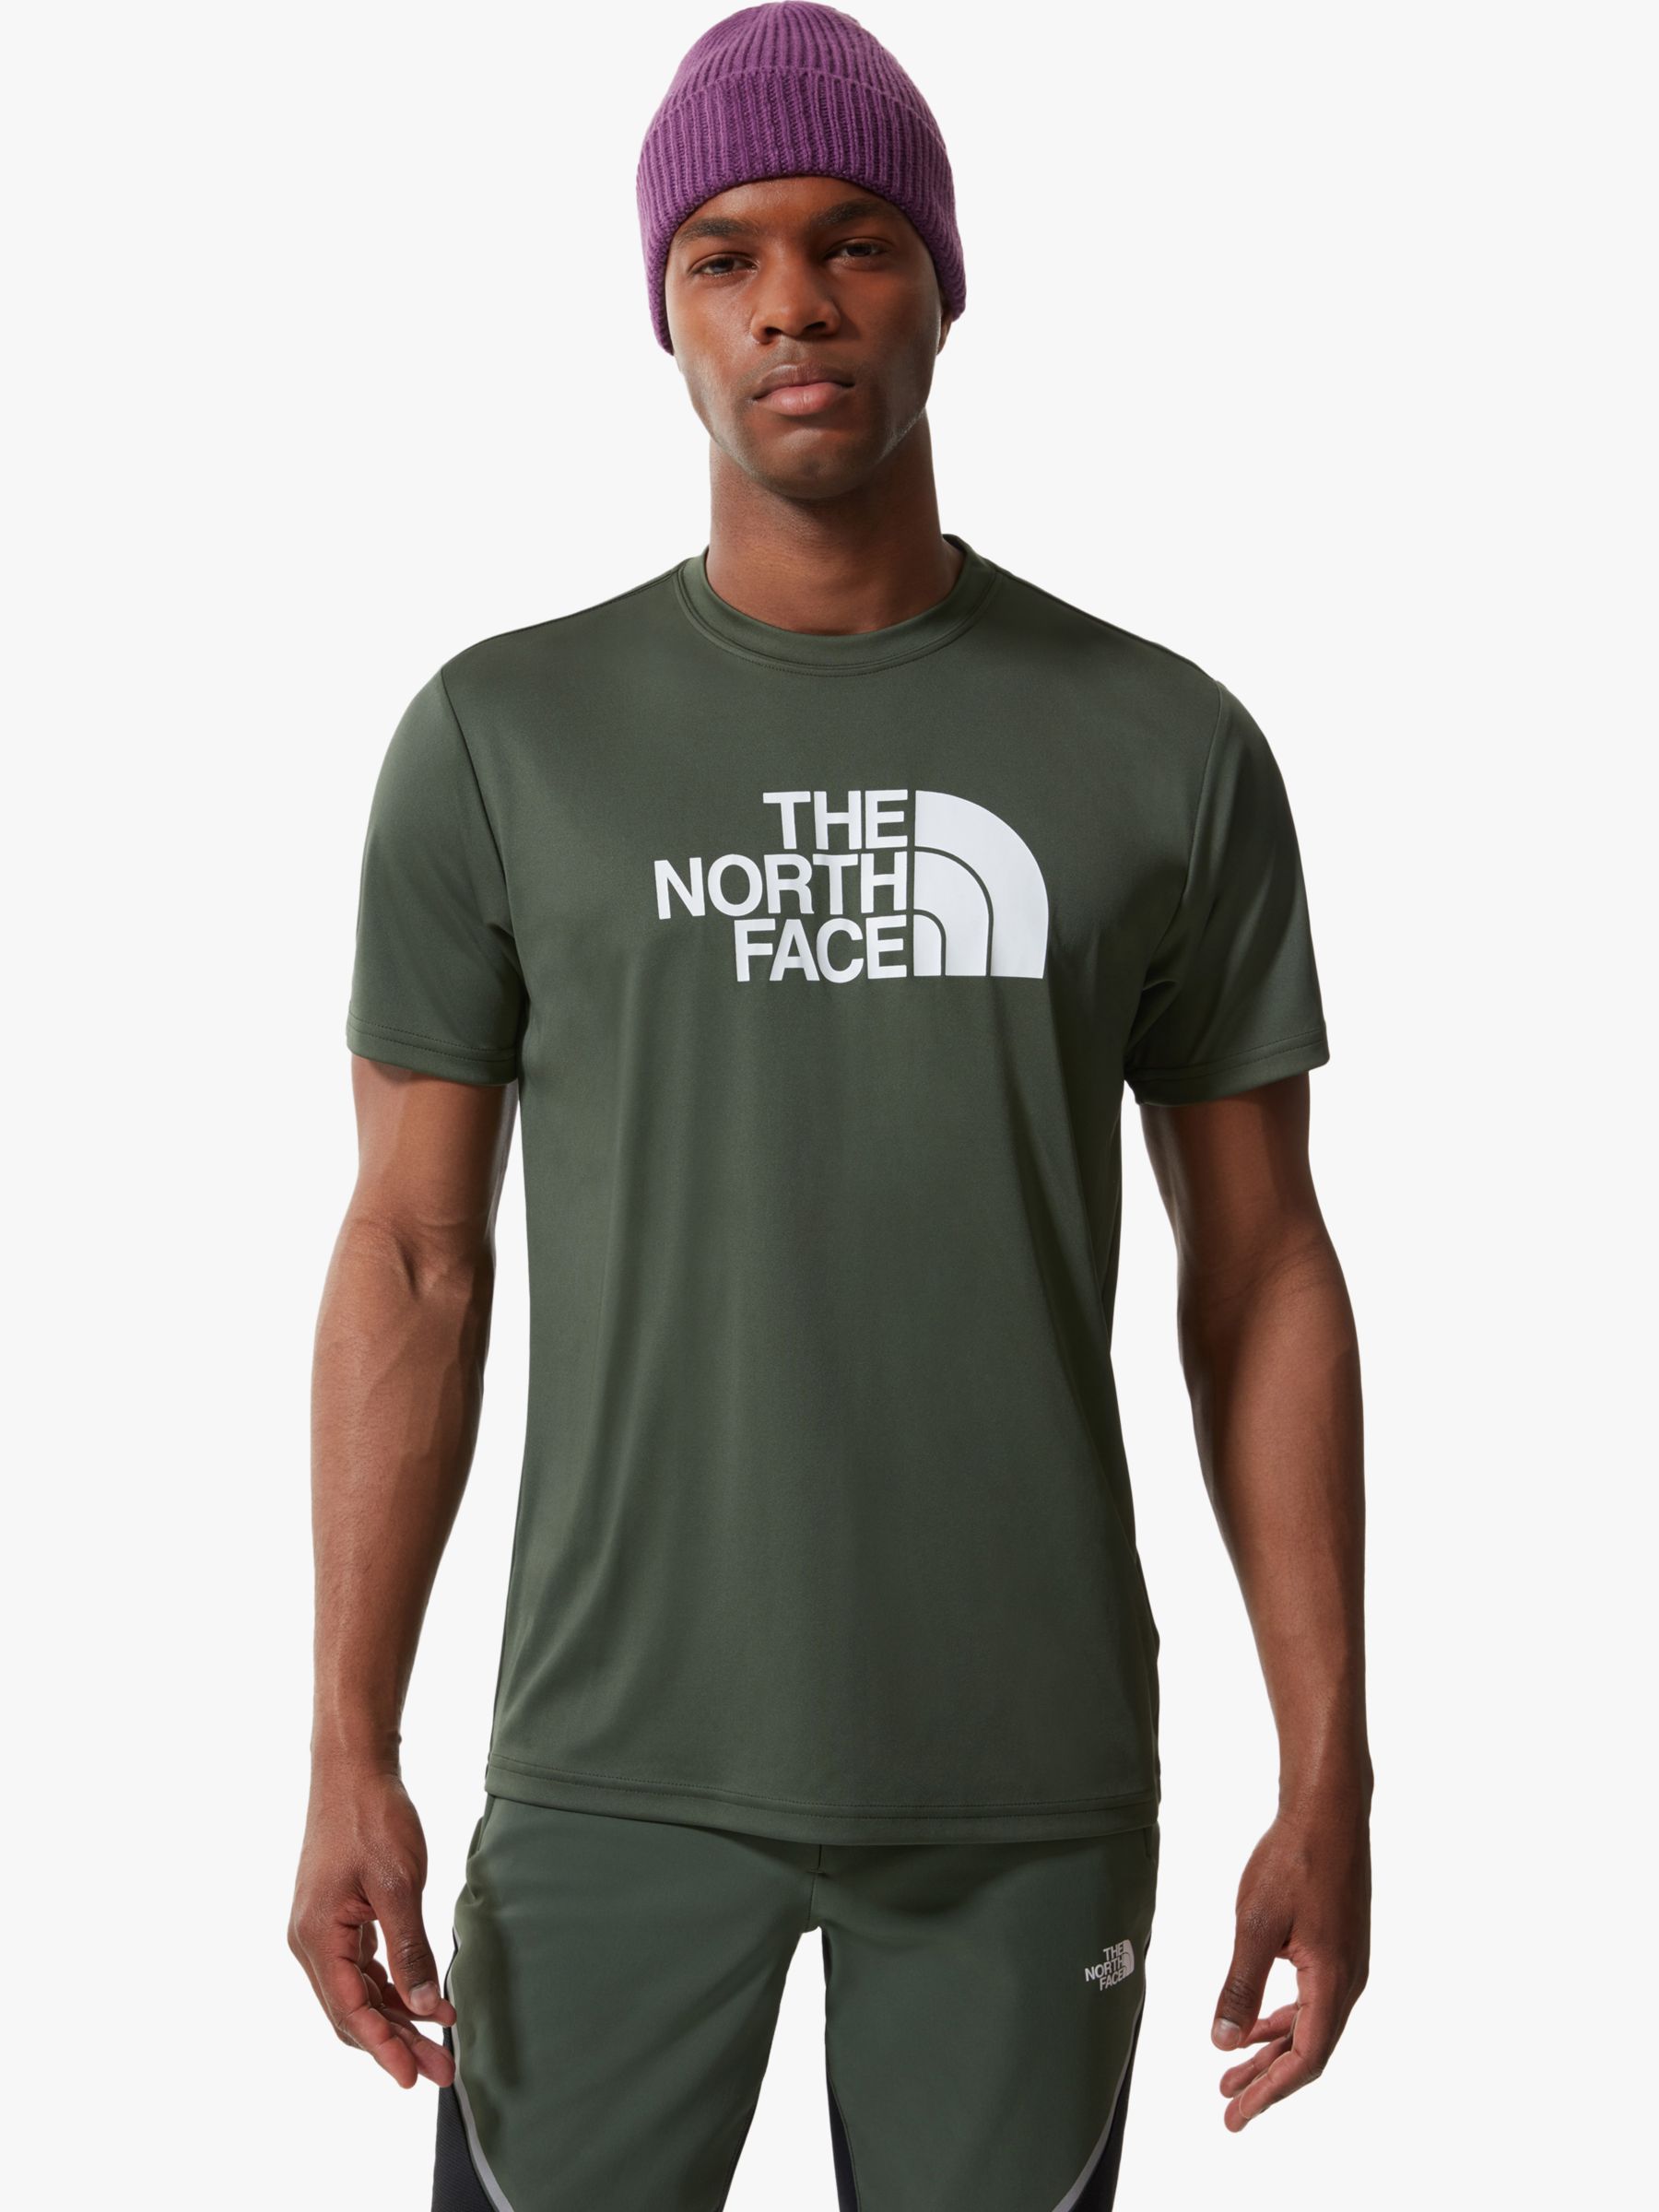 The North Face Easy T-Shirt, Thyme, S